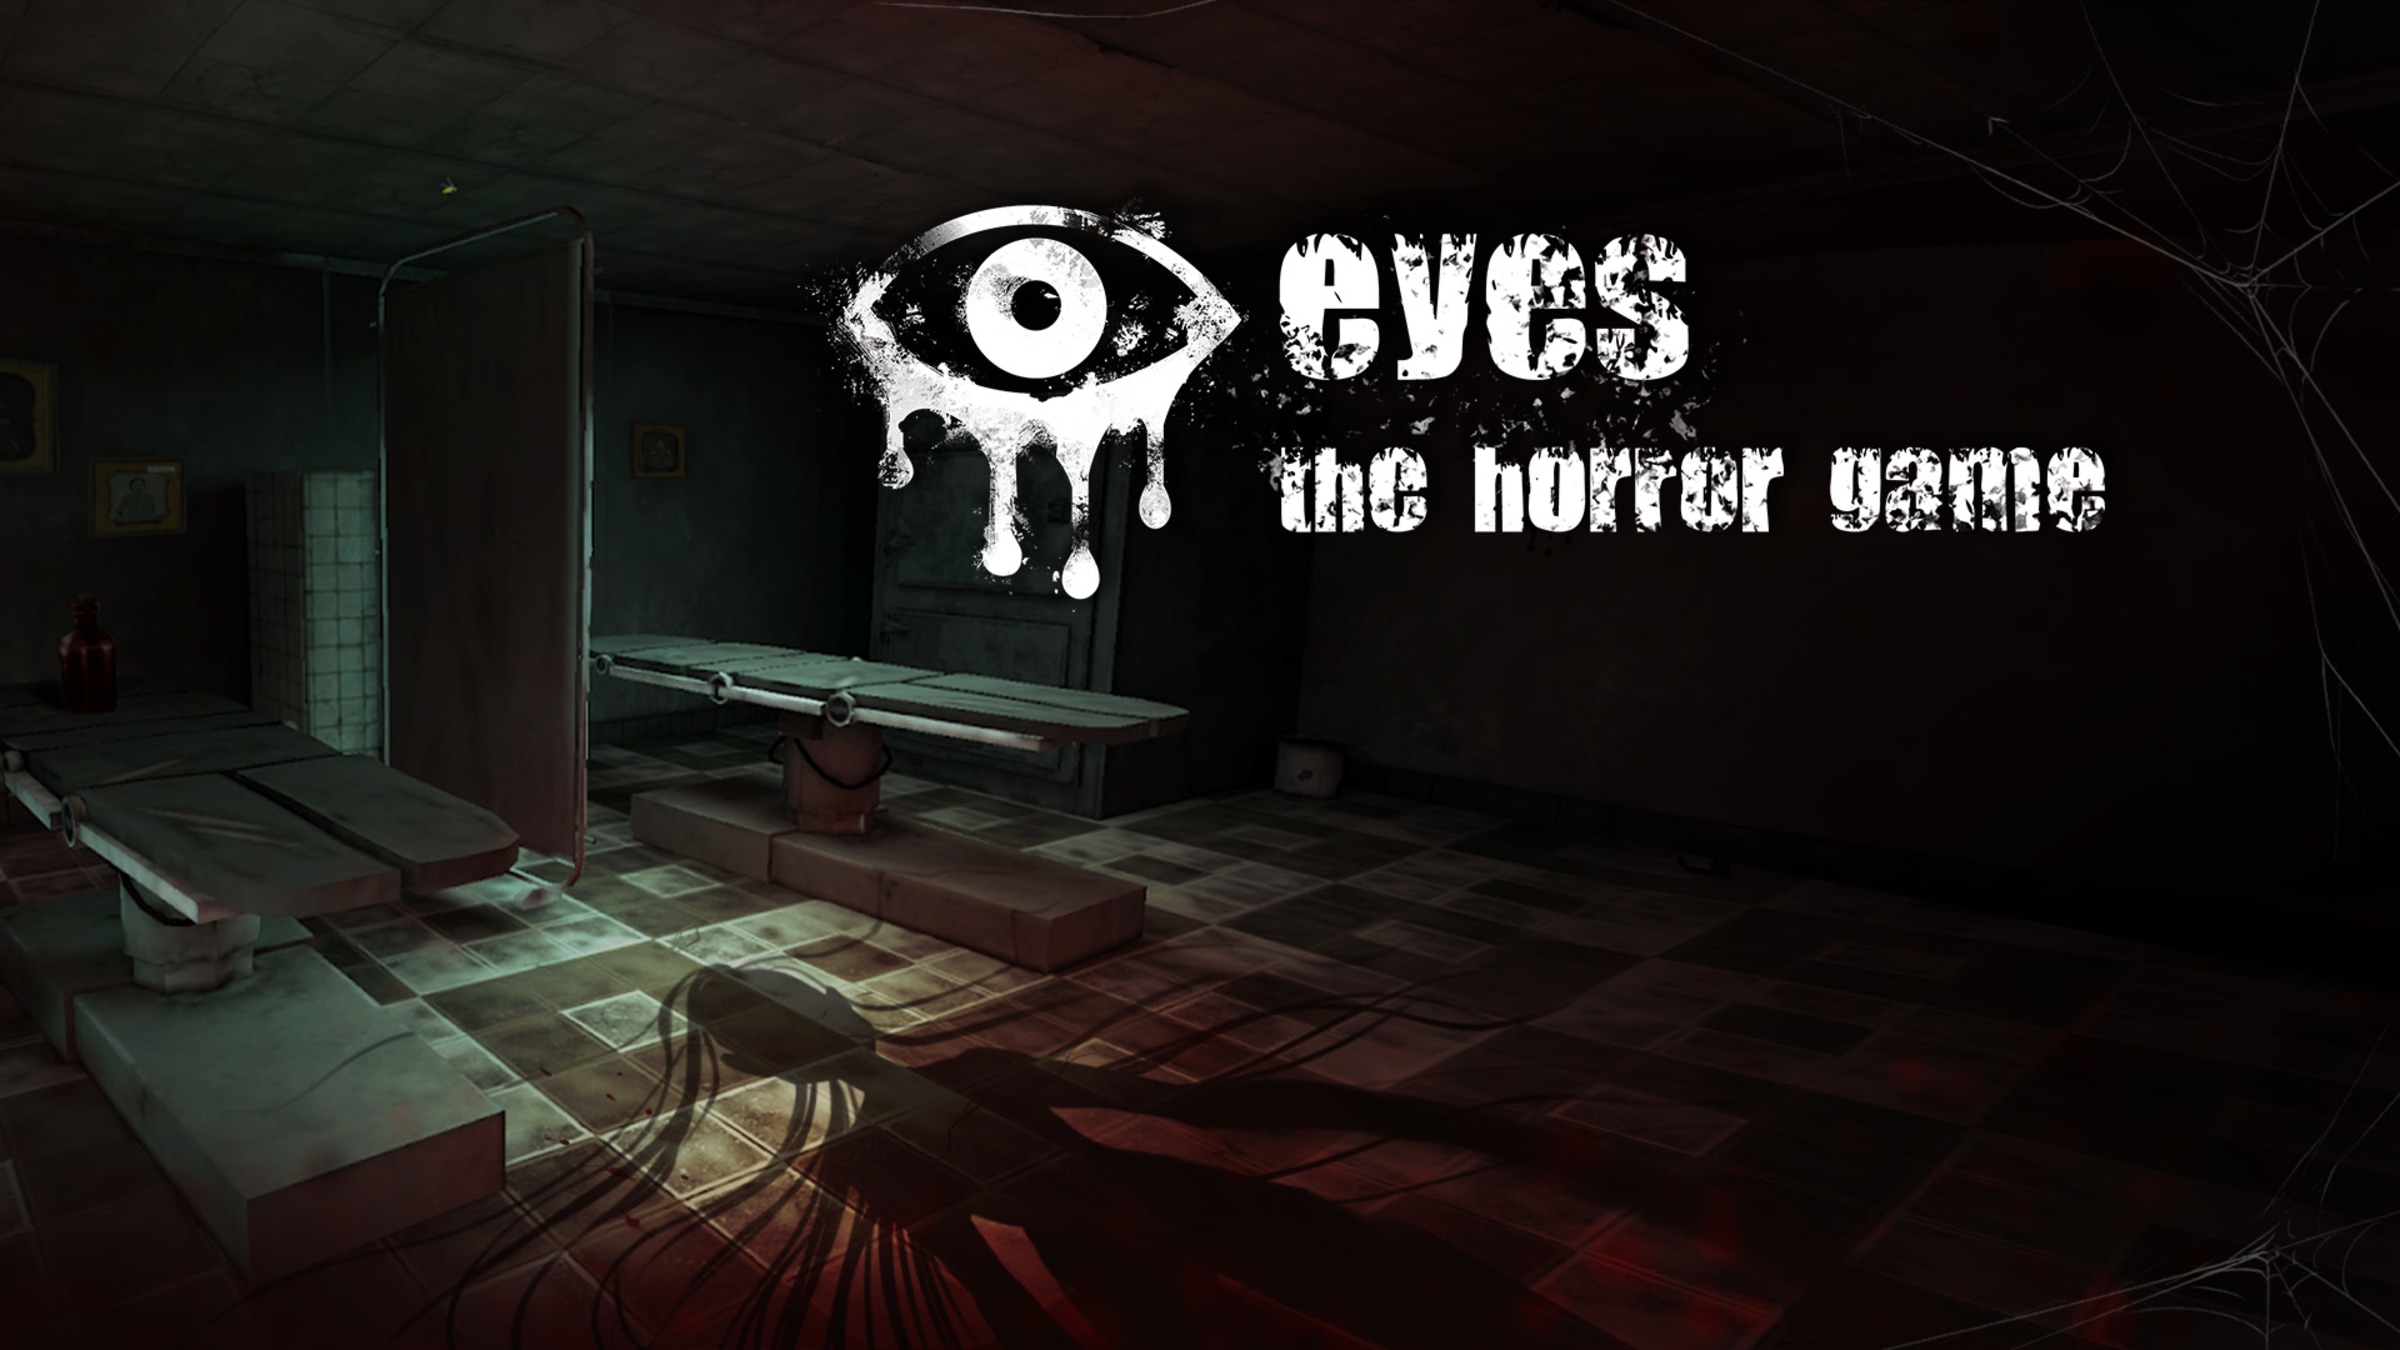 Eyes-the horor game